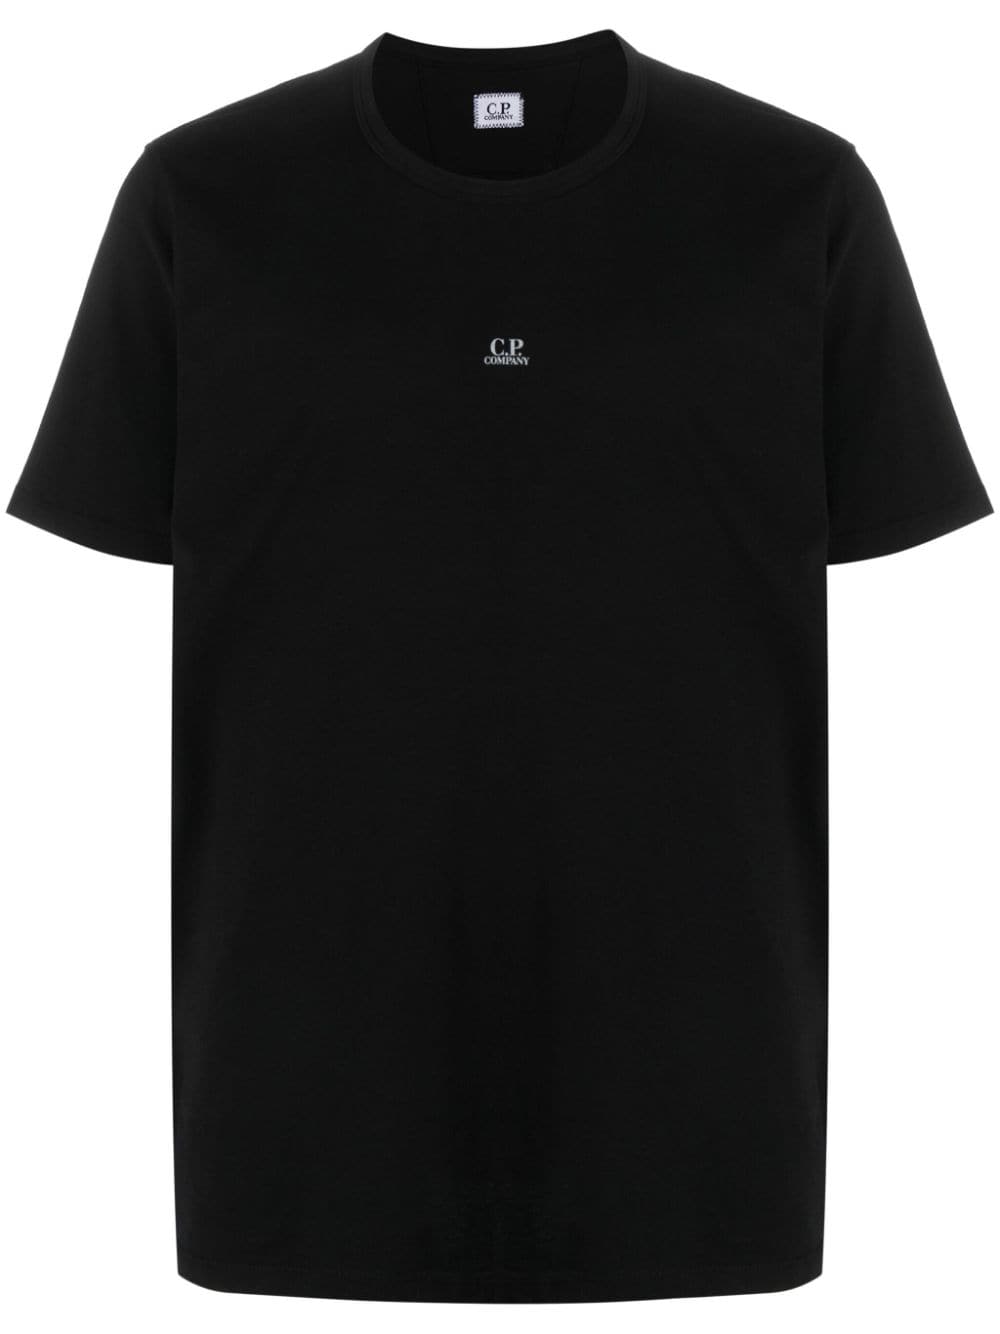 black t-shirt with central logo